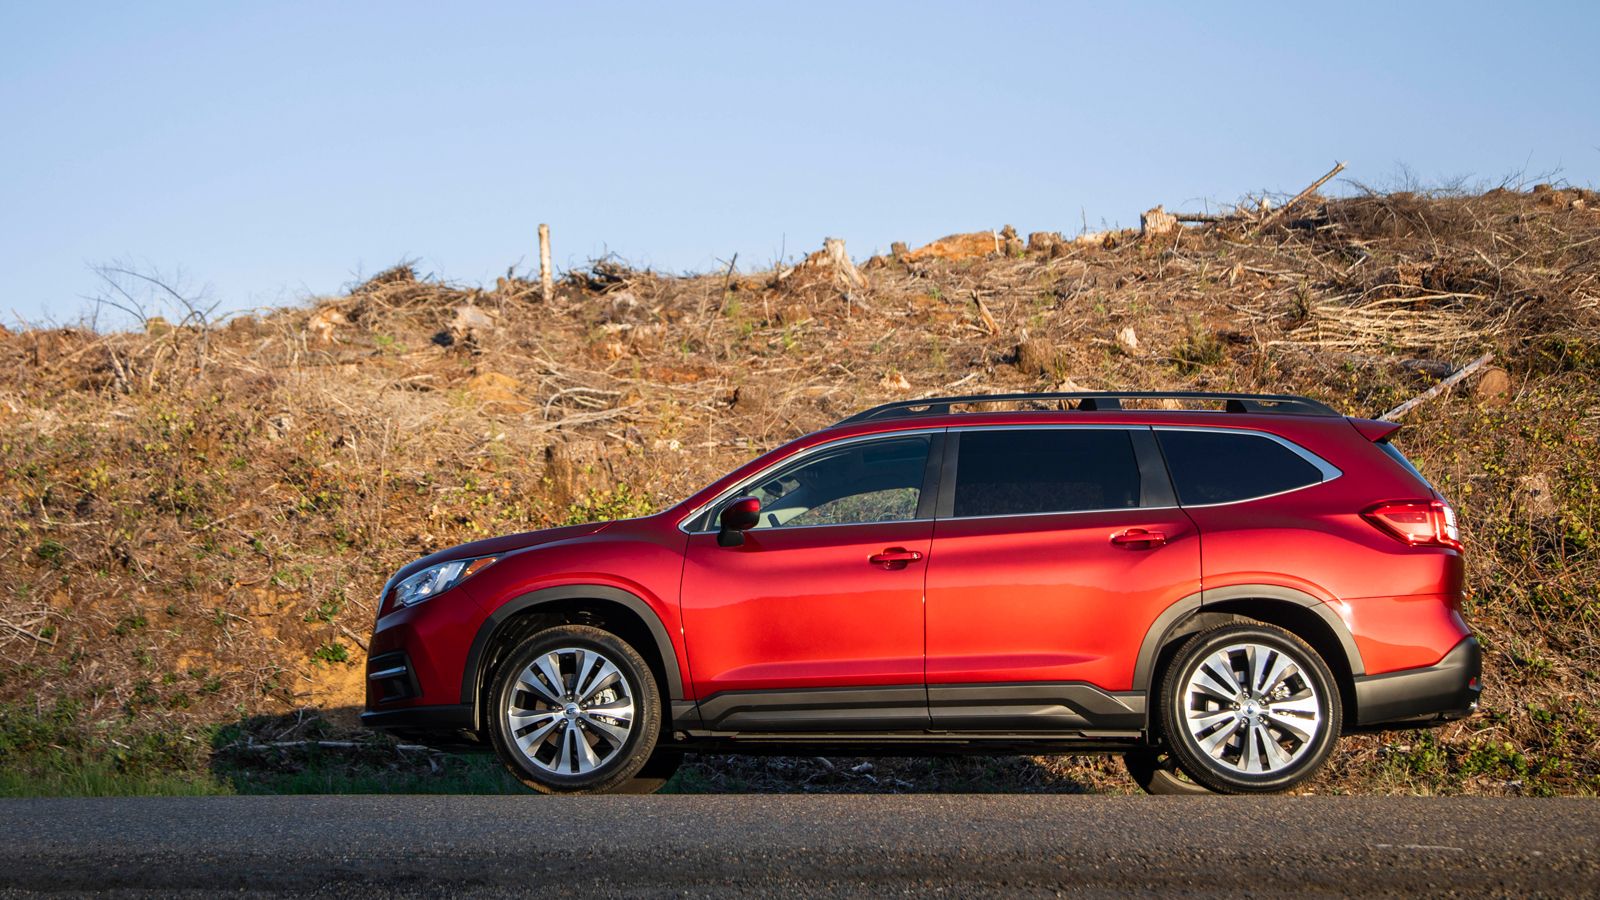 2020 Subaru Ascent Review Everything You Need To Know